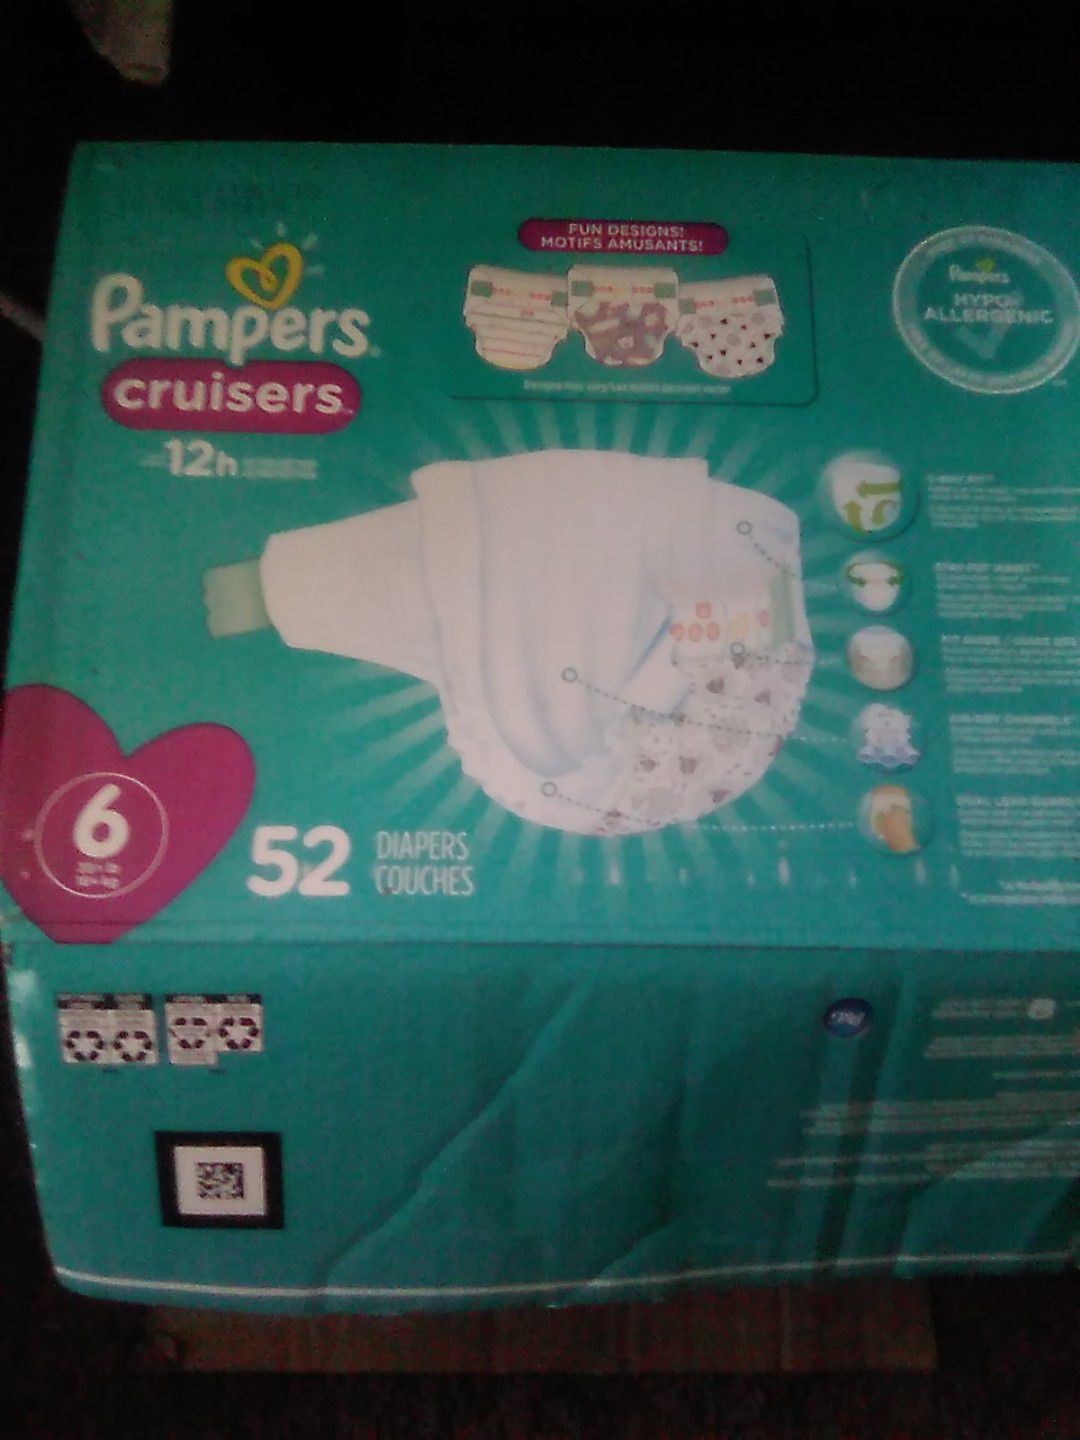 Pampers cruisers count 52